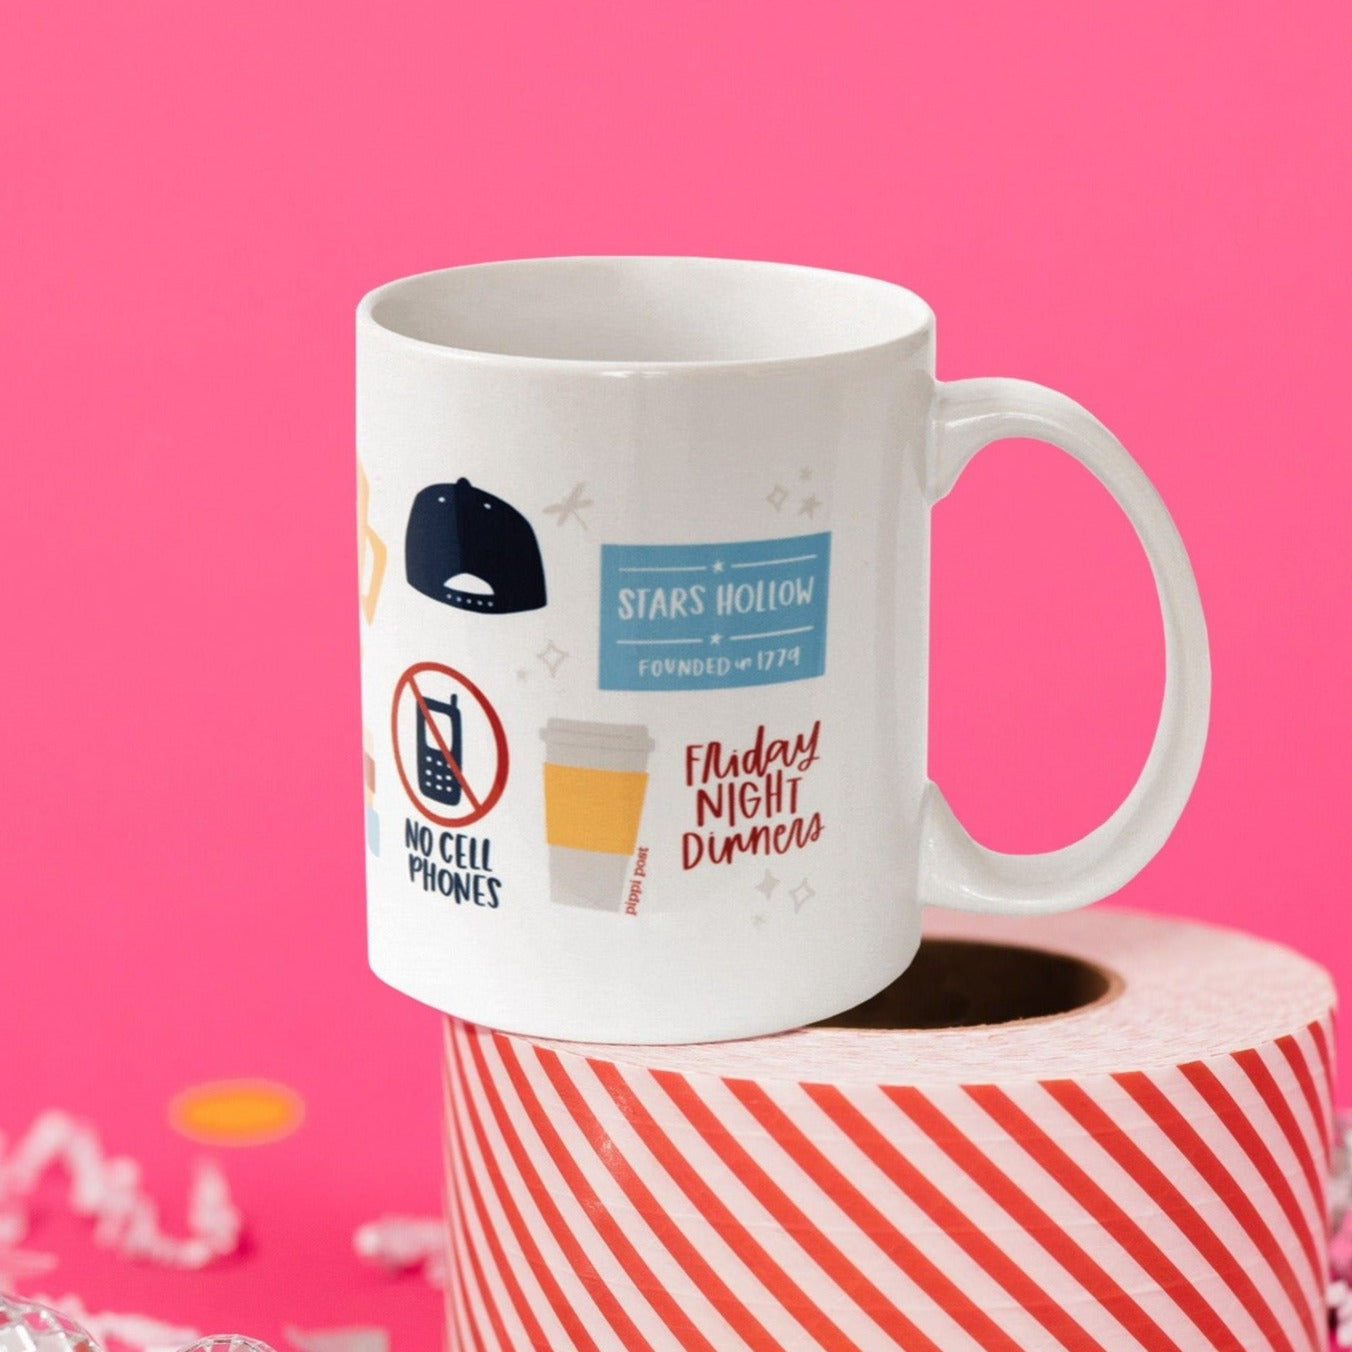 On a hot pink background sits a mug atop a red and white striped roll of packing tape with white crinkle and big, colorful confetti scattered around. There are mini disco balls. This Gilmore Girls inspired white mug has colorful illustrations from the show. It says "STARS HOLLOW FOUNDED in 1774." There is a navy backwards cap, a to-go coffee cup, a cell phone that has red circle and slash on top that says "NO CELL PHONES" and it also says "Friday NIGHT Dinners."